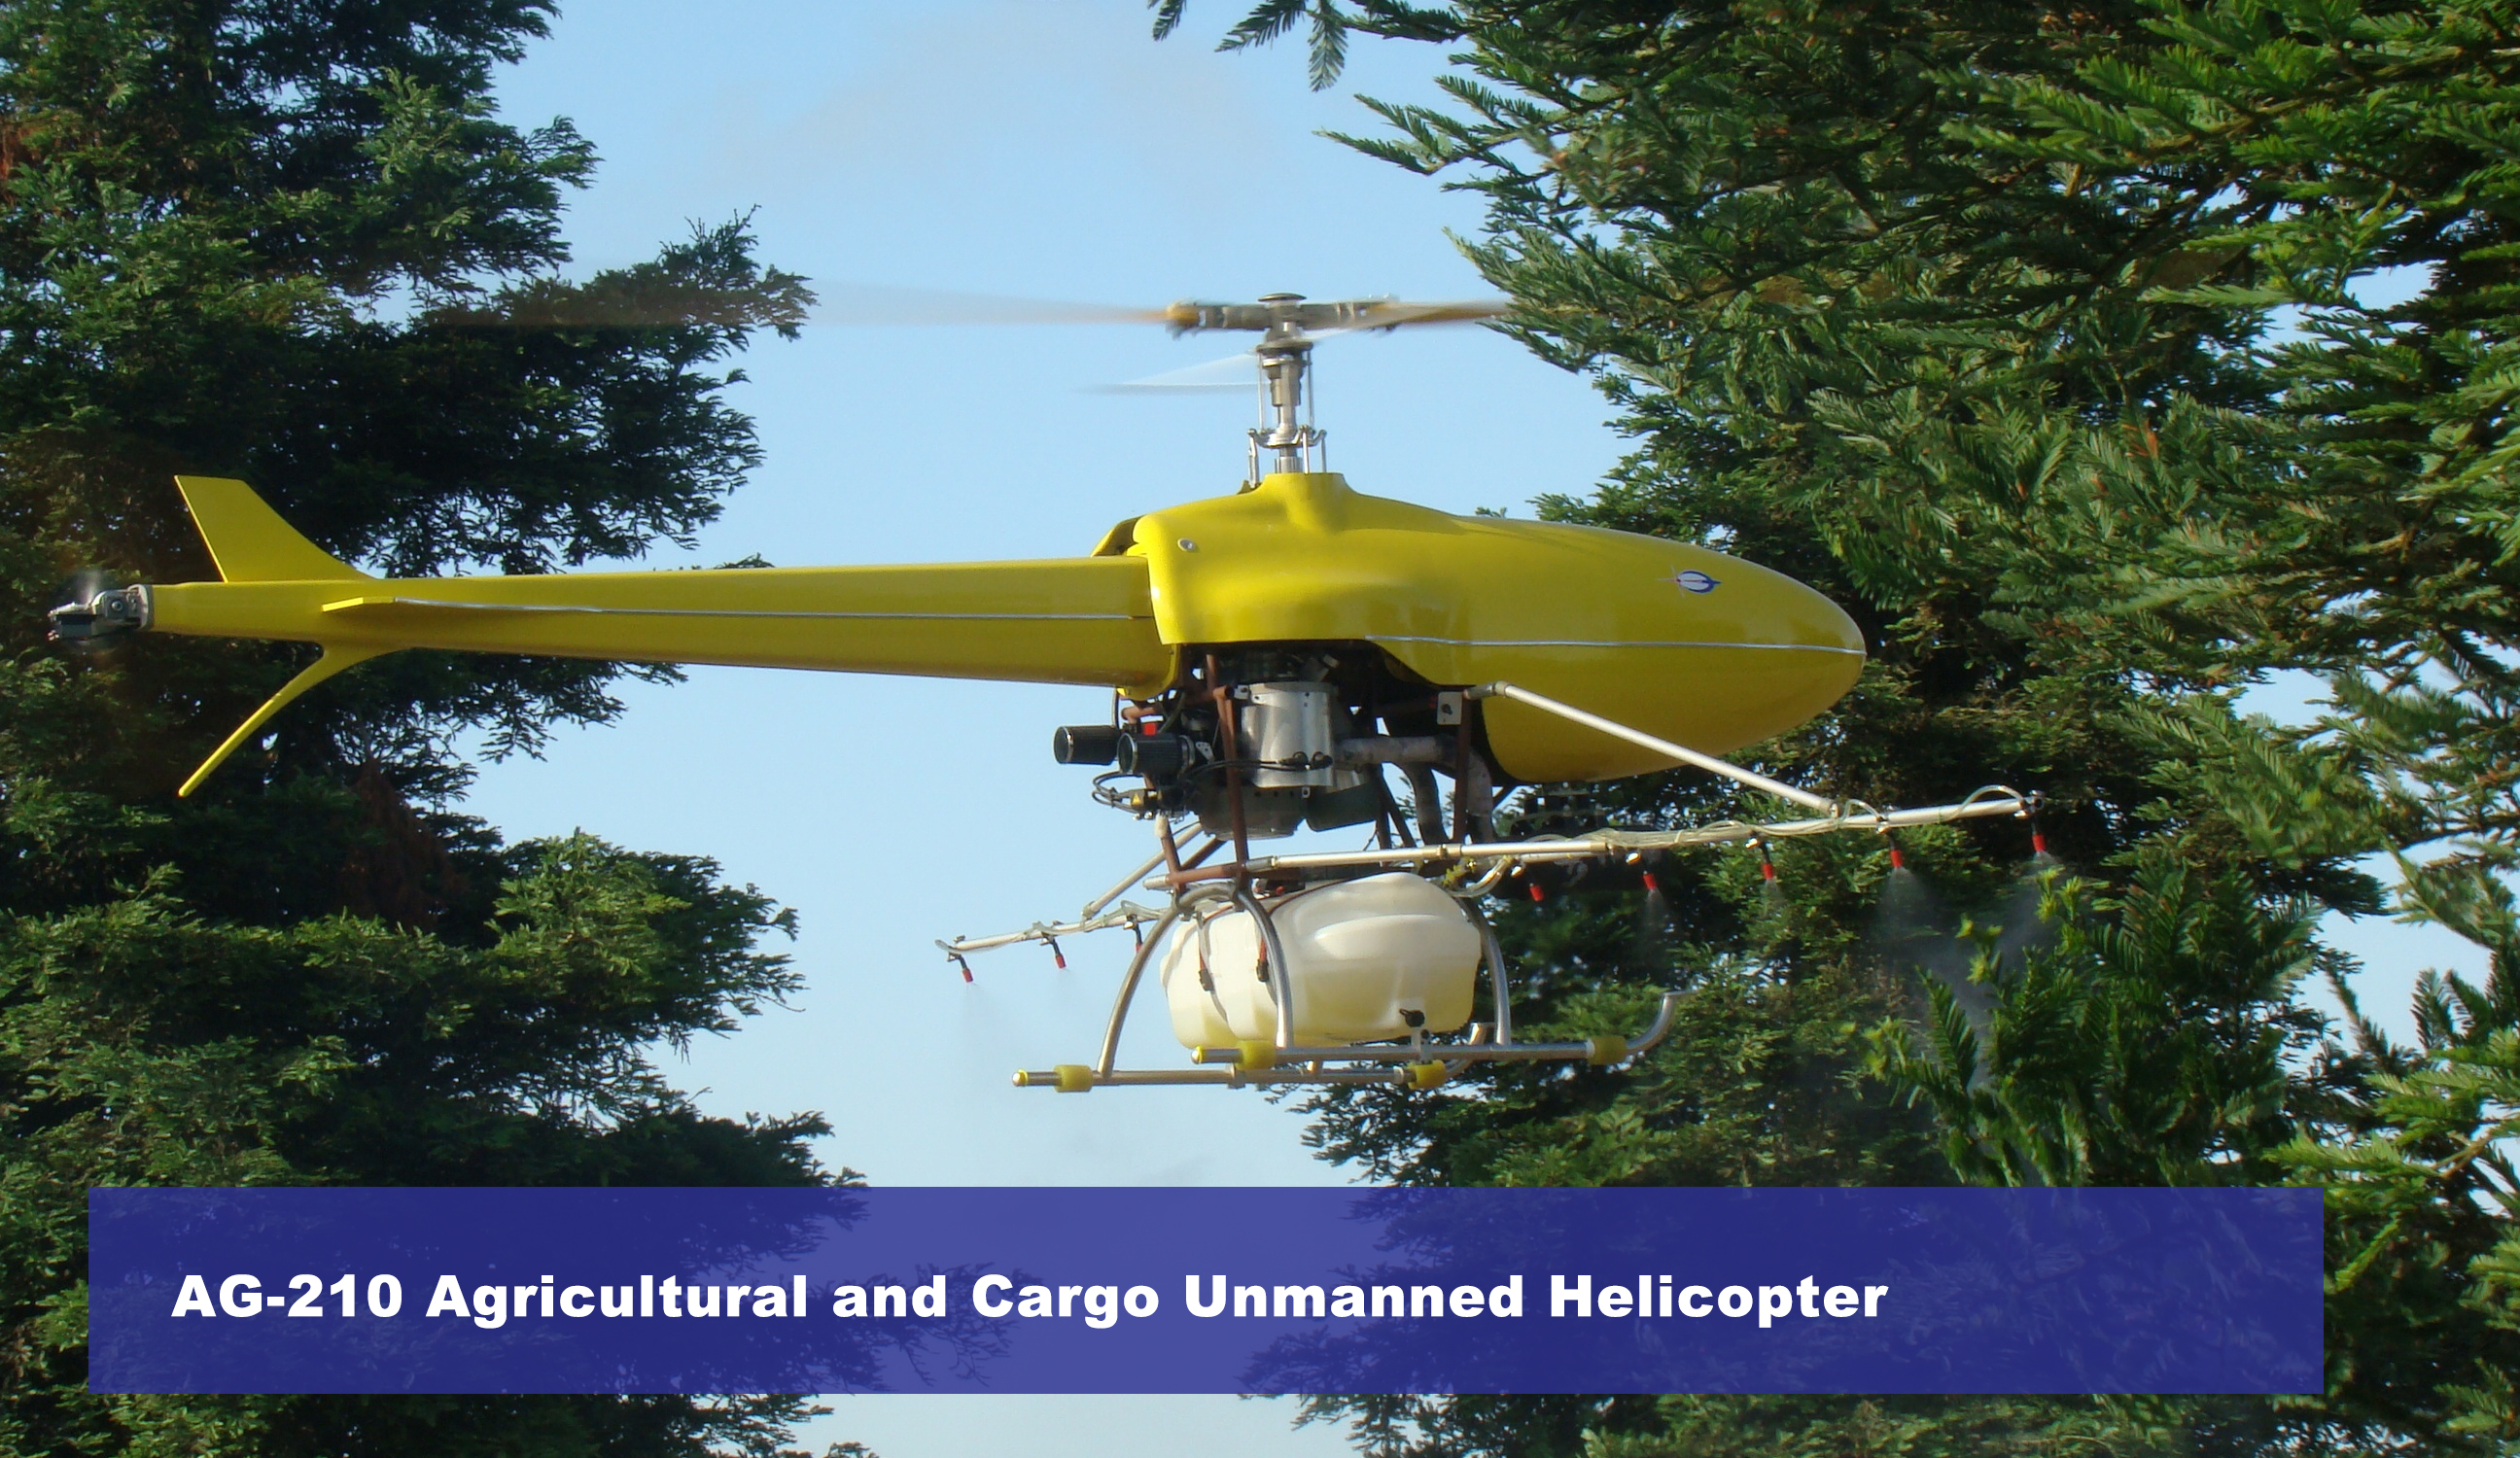 AG-210 Agricultural and Cargo Unmanned Helicopter